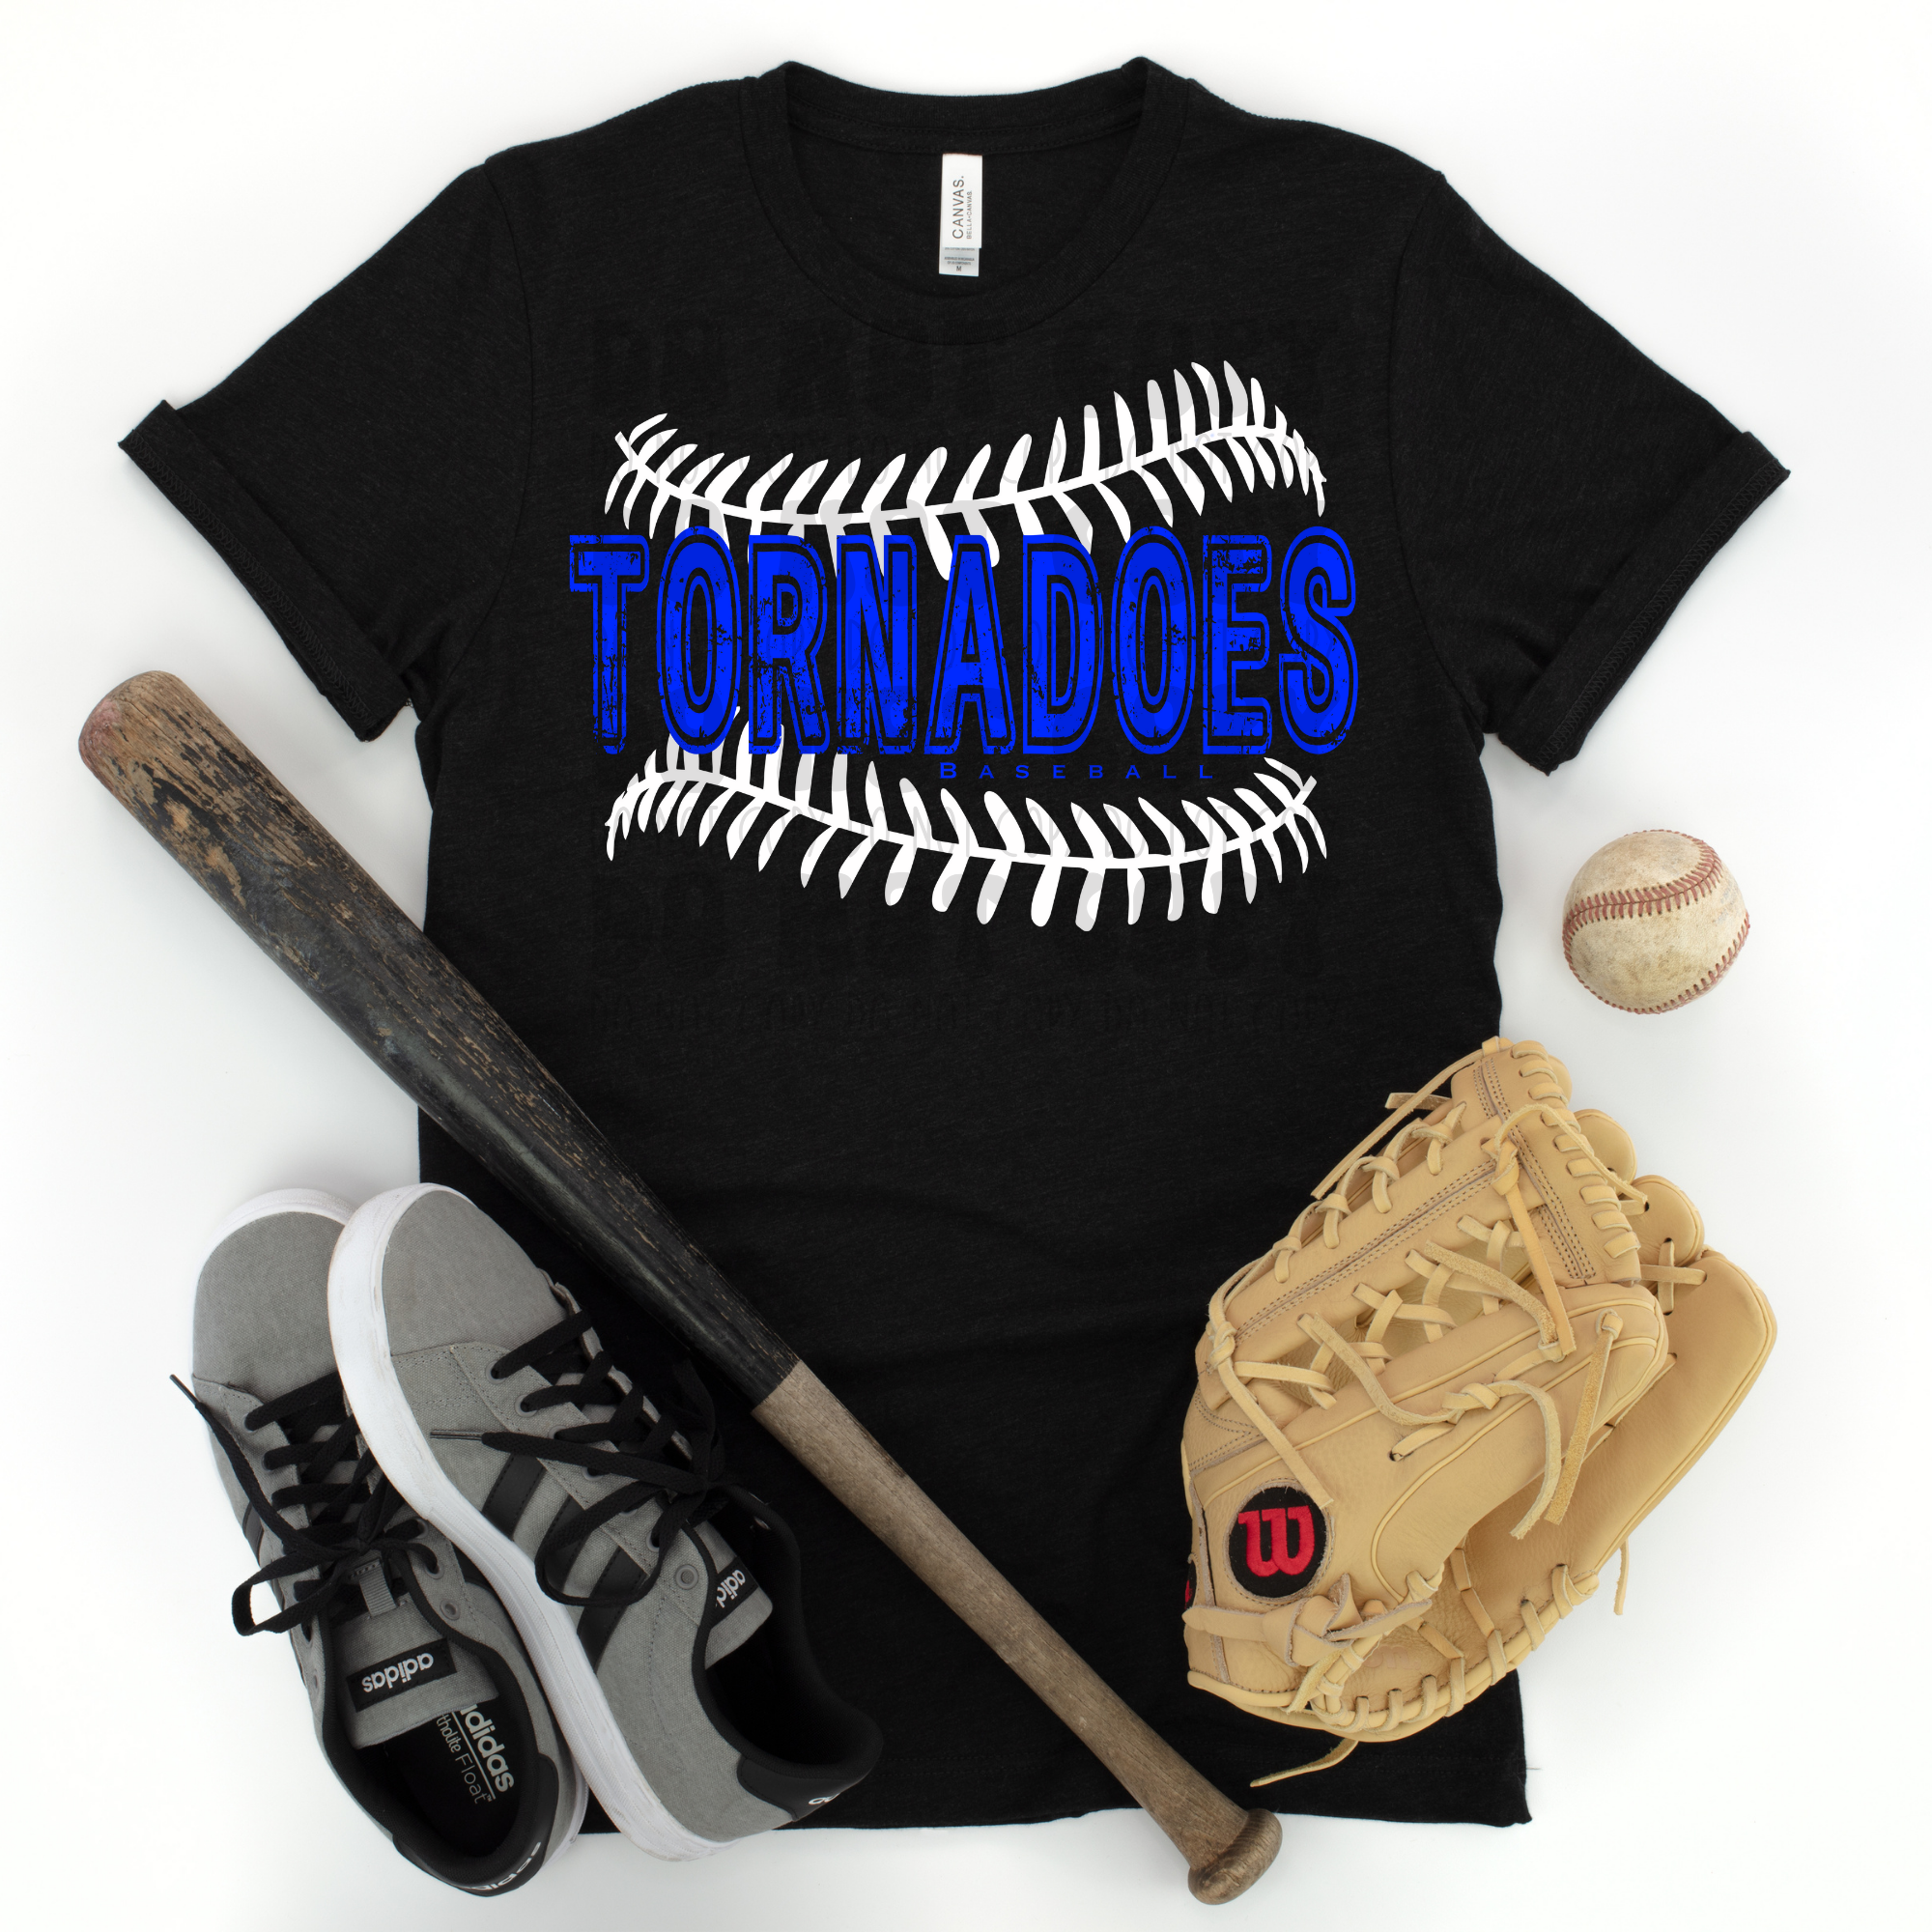 PRE-ORDER - TORNADOES BASEBALL YOUTH - YOU CHOOSE COLOR